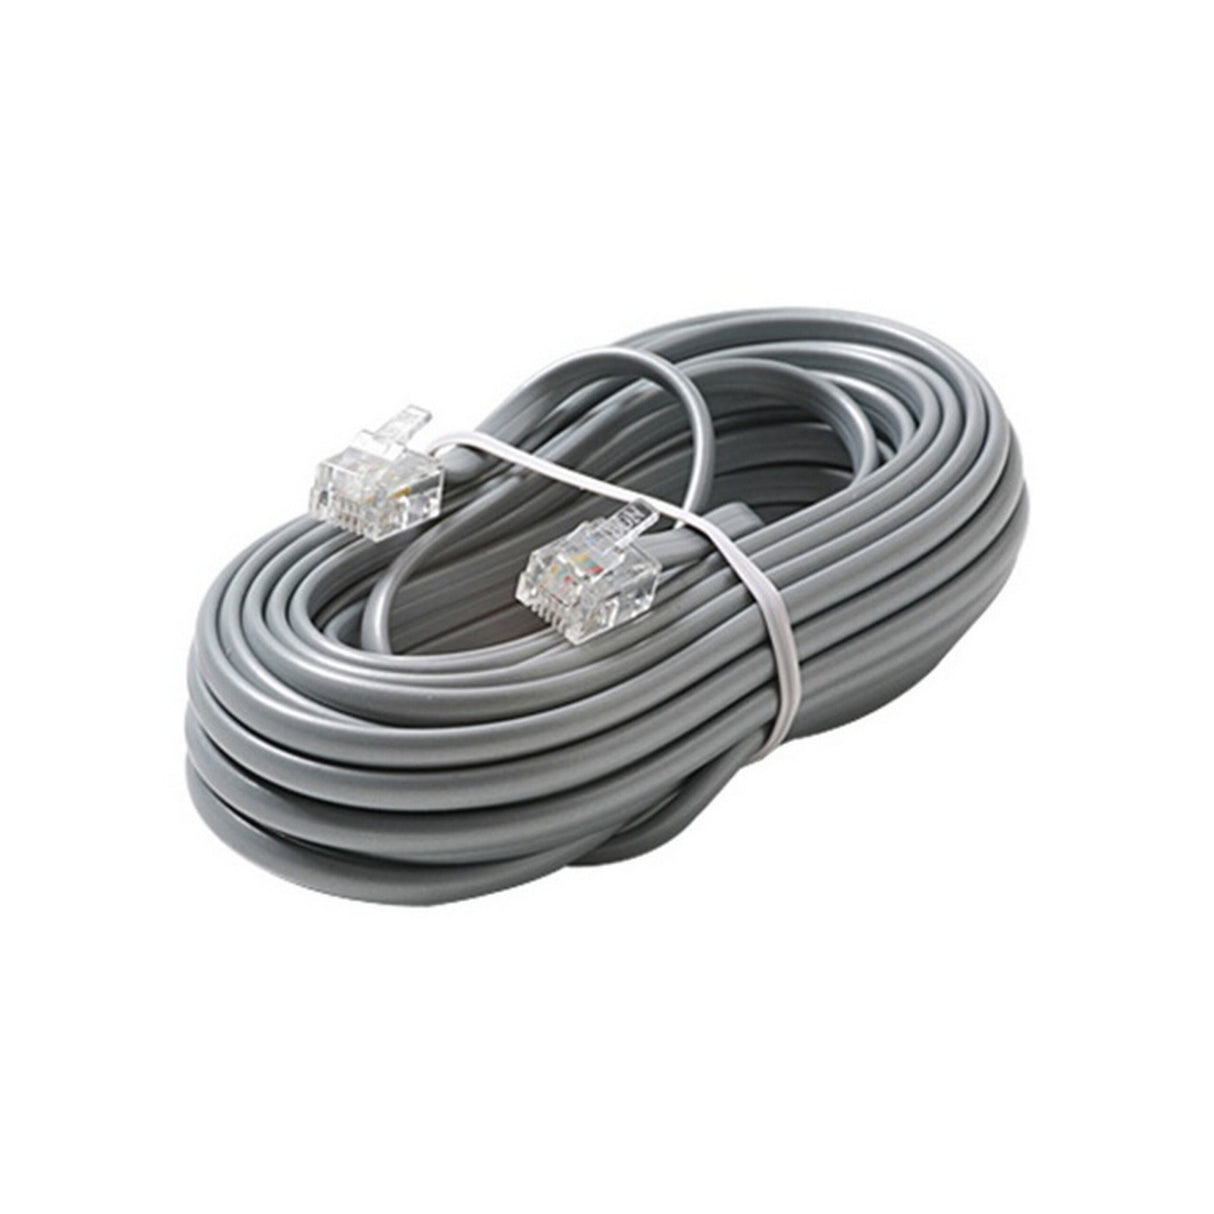 Steren 304-025SL 4C Telephone Line Cord, Silver, 25 Foot